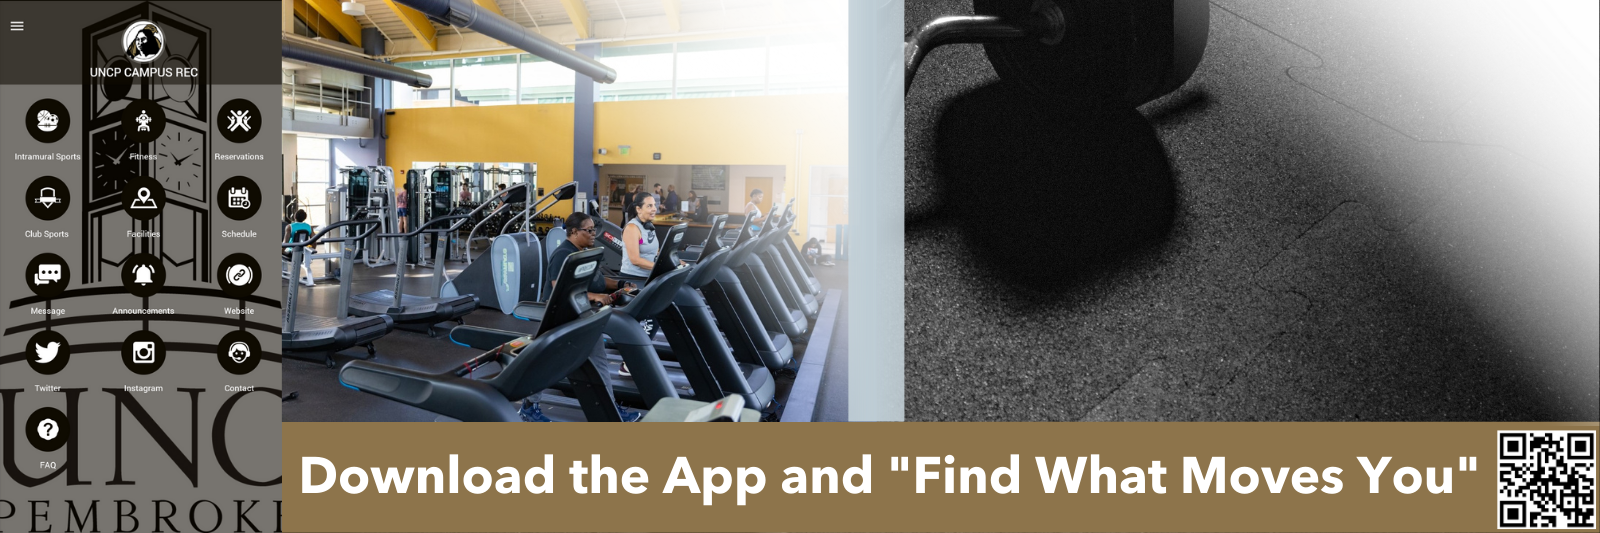 Students Exercising in the Wellness Center with Campus Recreation App